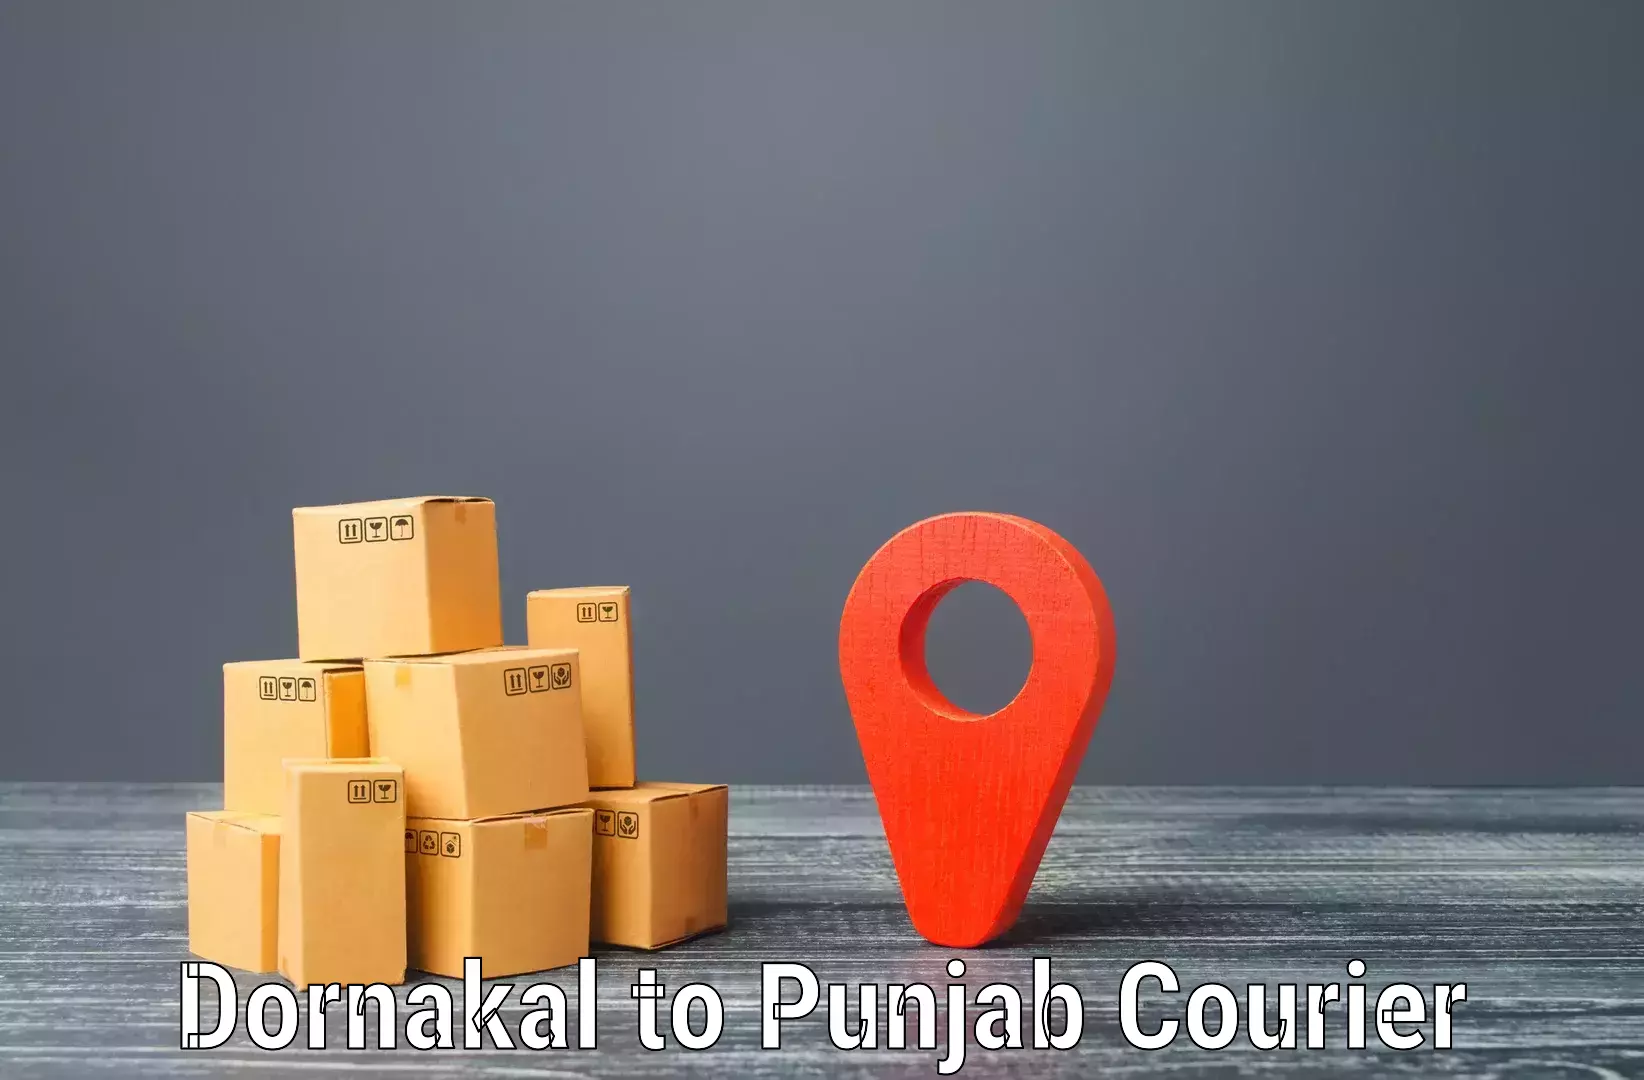 Courier service efficiency Dornakal to Mohali